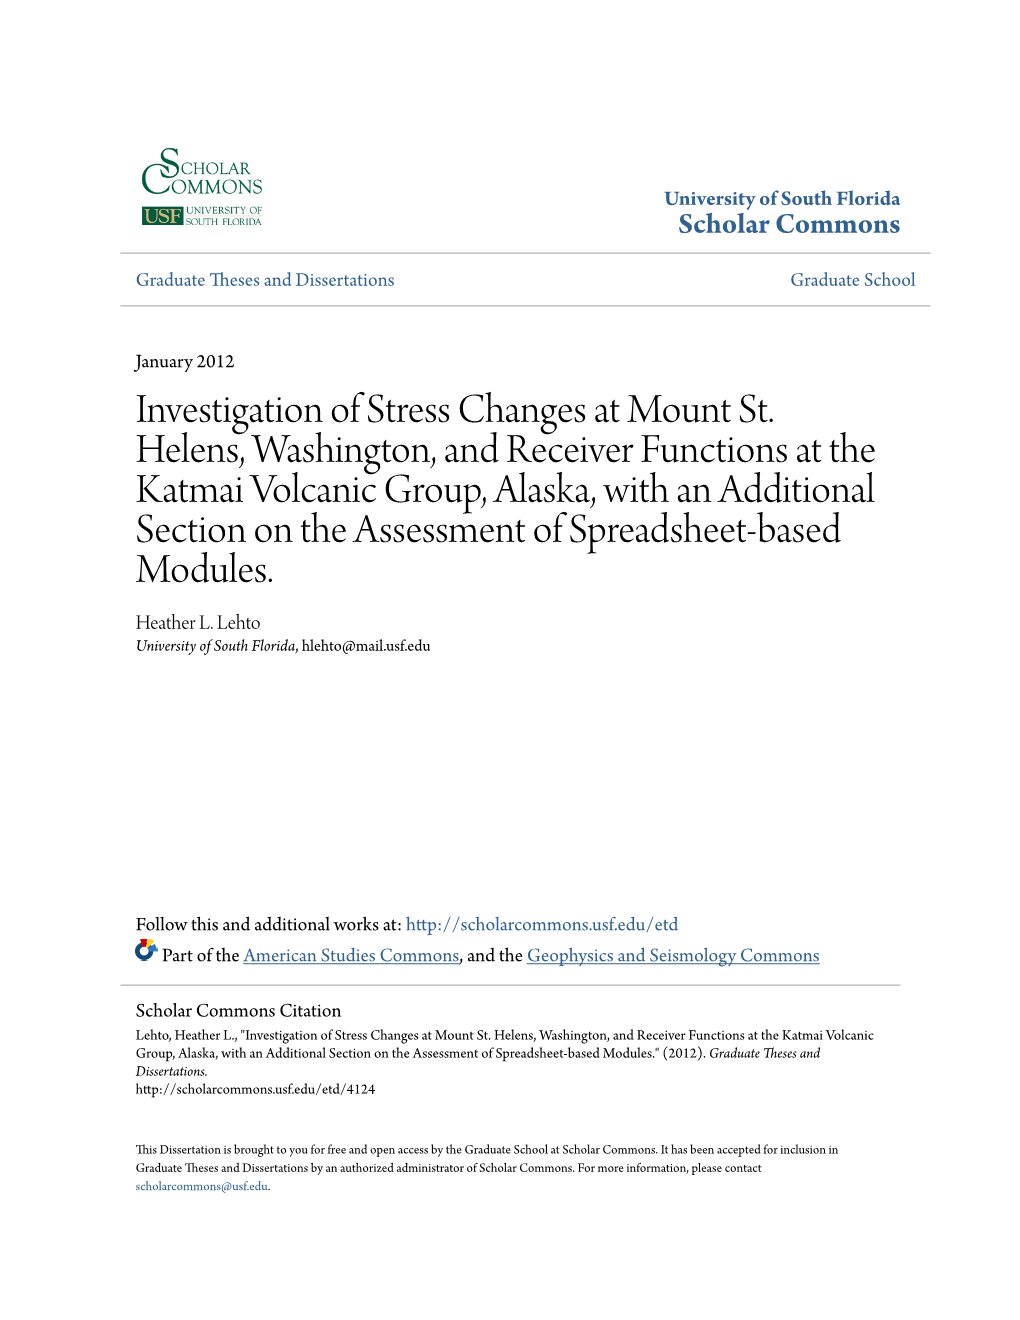 Investigation of Stress Changes at Mount St. Helens, Washington, and Receiver Functions at the Katmai Volcanic Group, Alaska, Wi